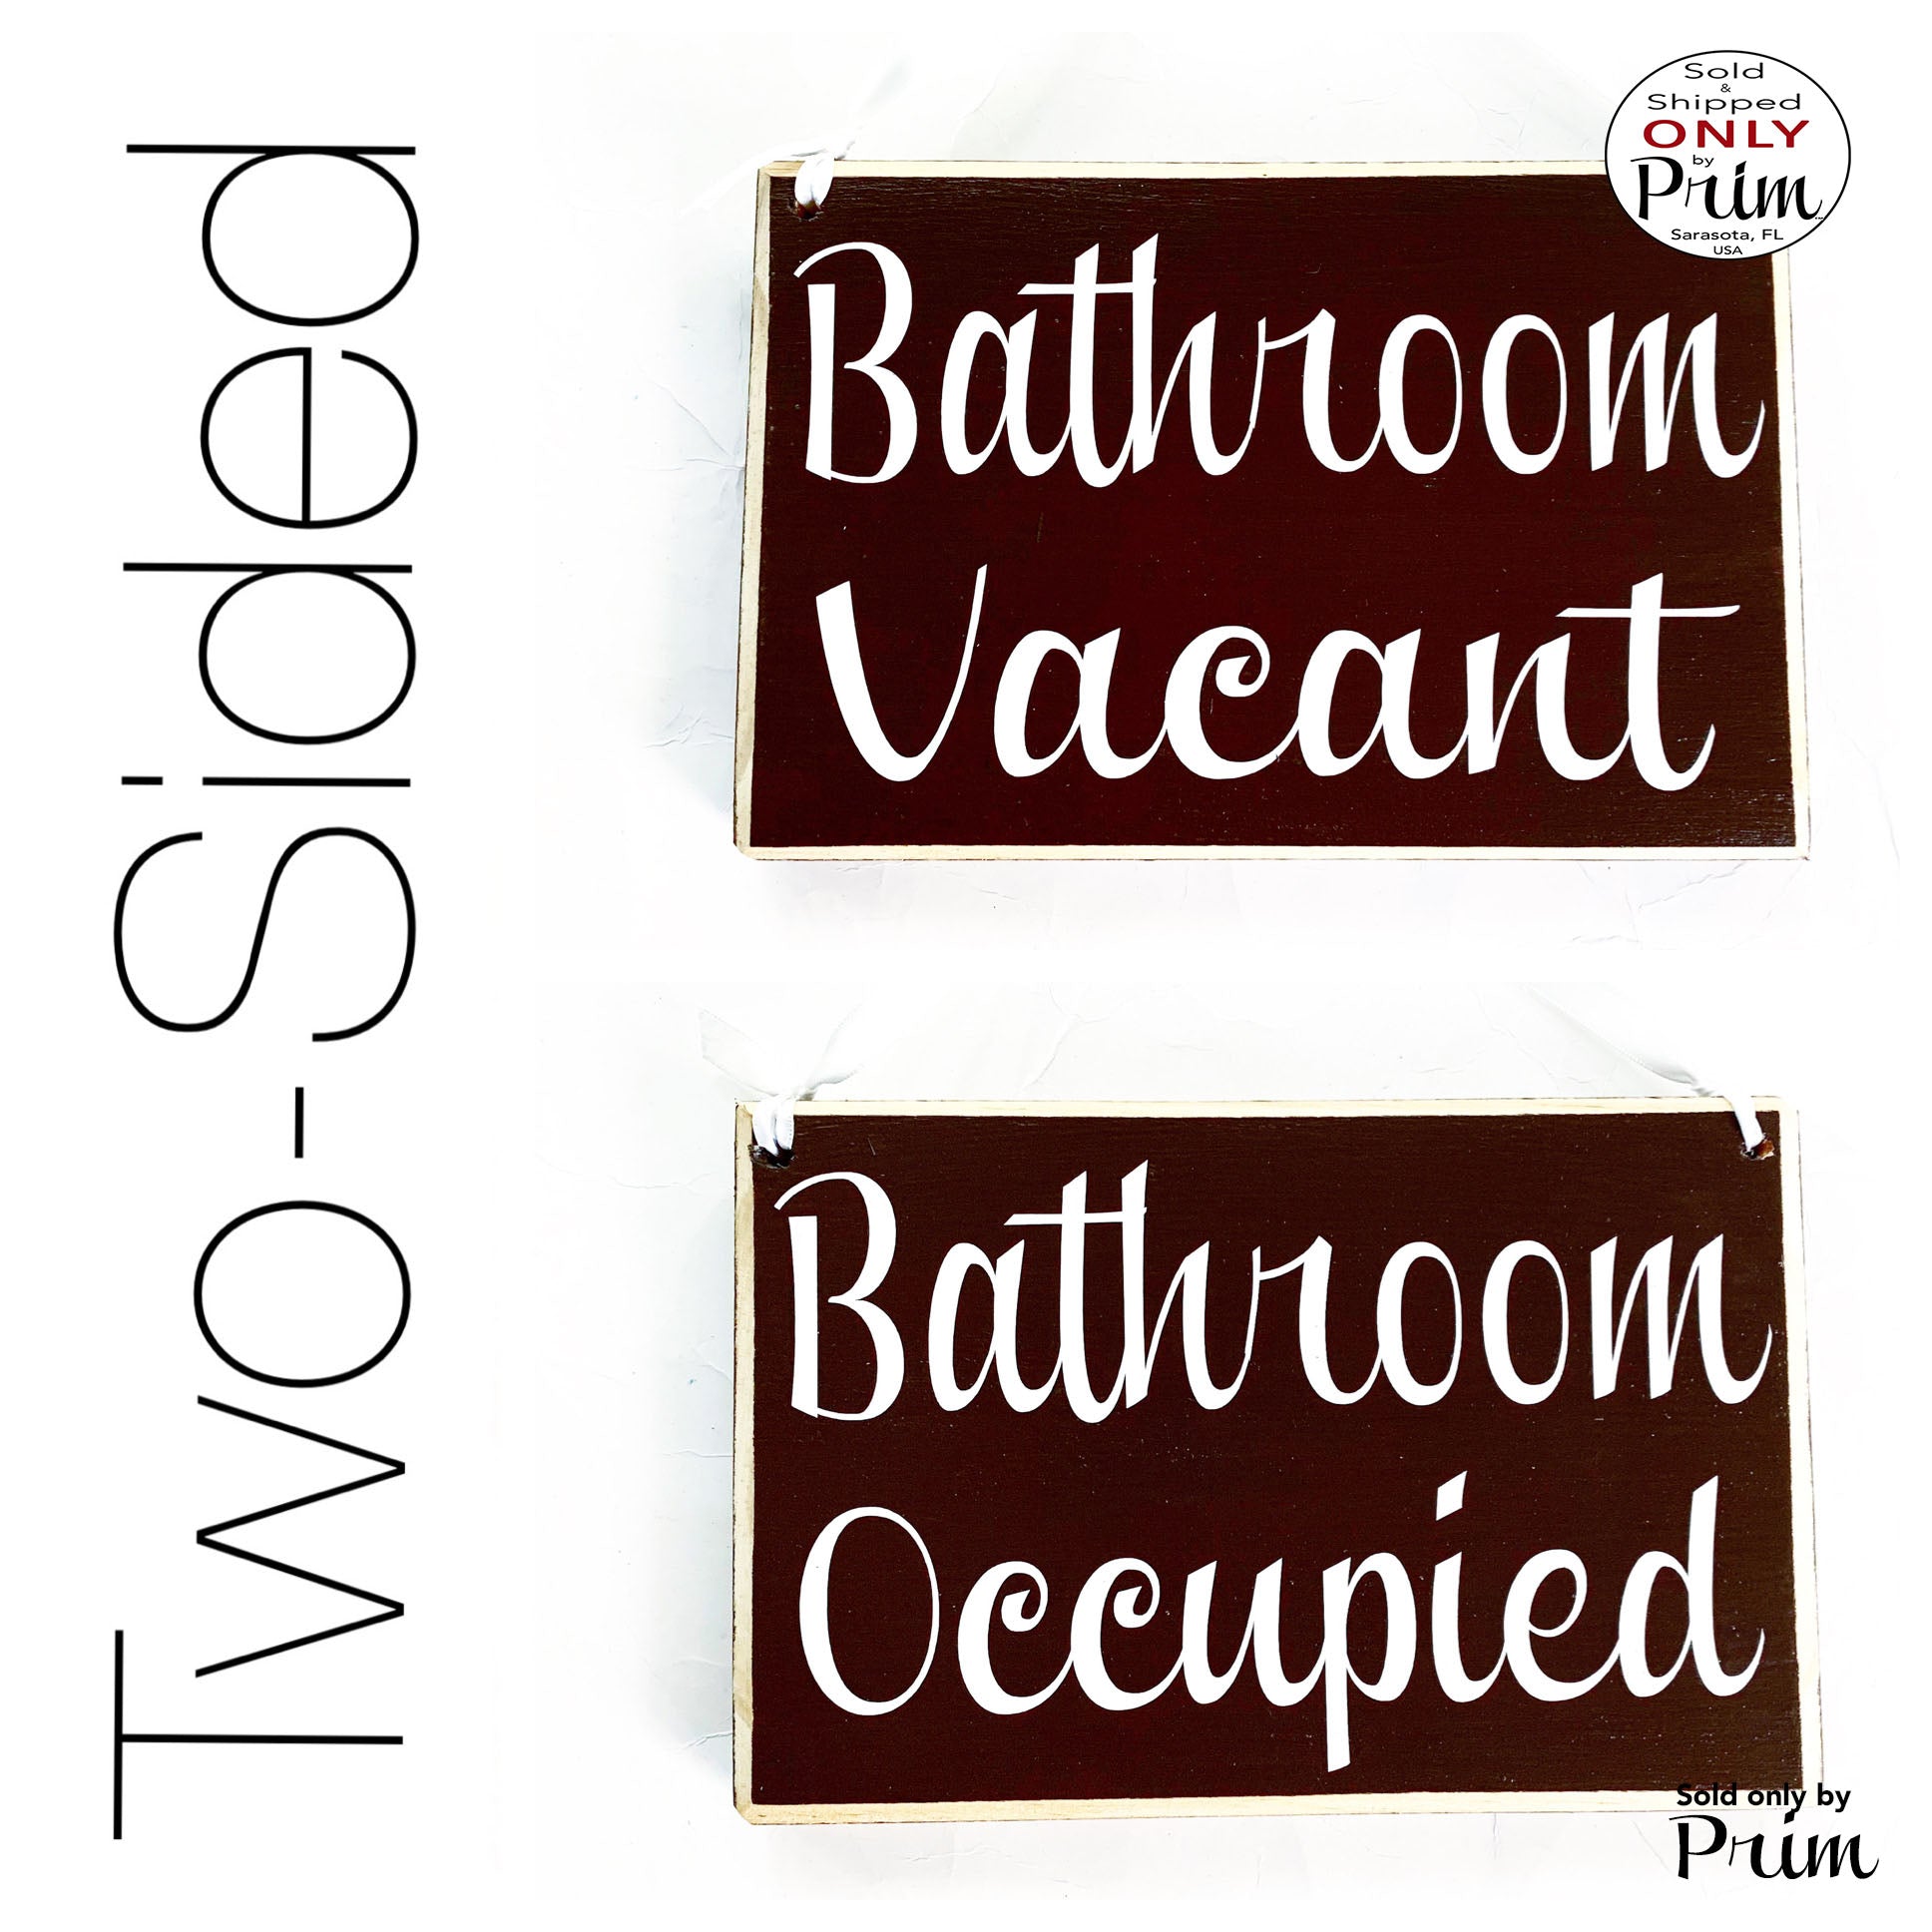 8x6 Bathroom Vacant Bathroom Occupied Custom Wood Sign Restroom Loo Clinic Spa Salon Office Welcome Two-Sided Available In Use Door Plaque